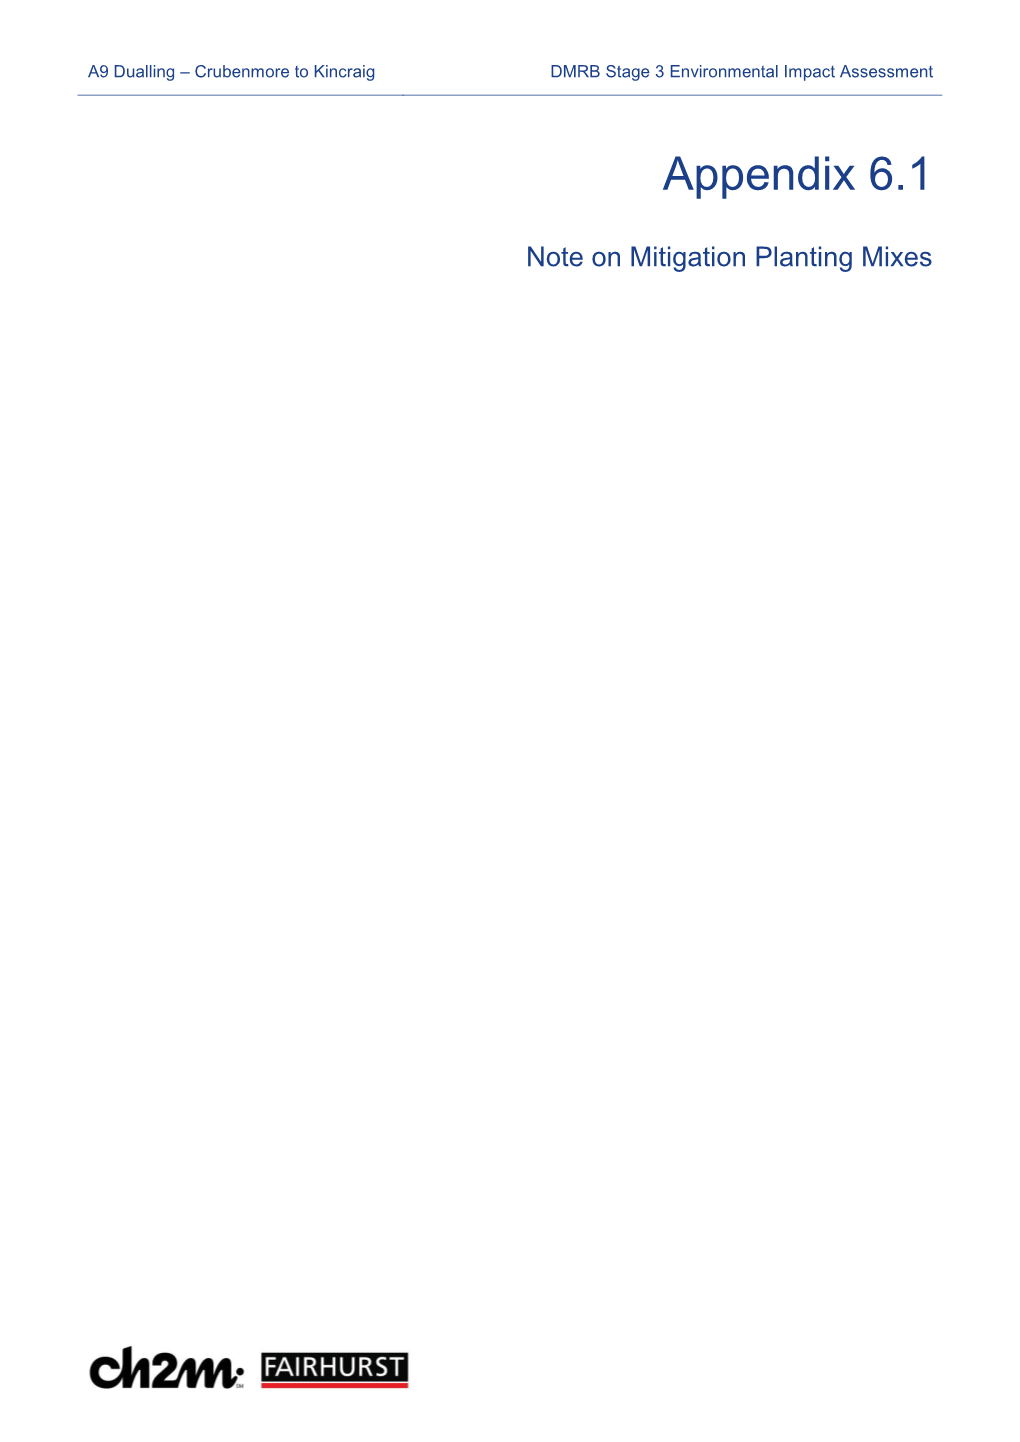 Note on Mitigation Planting Mixes